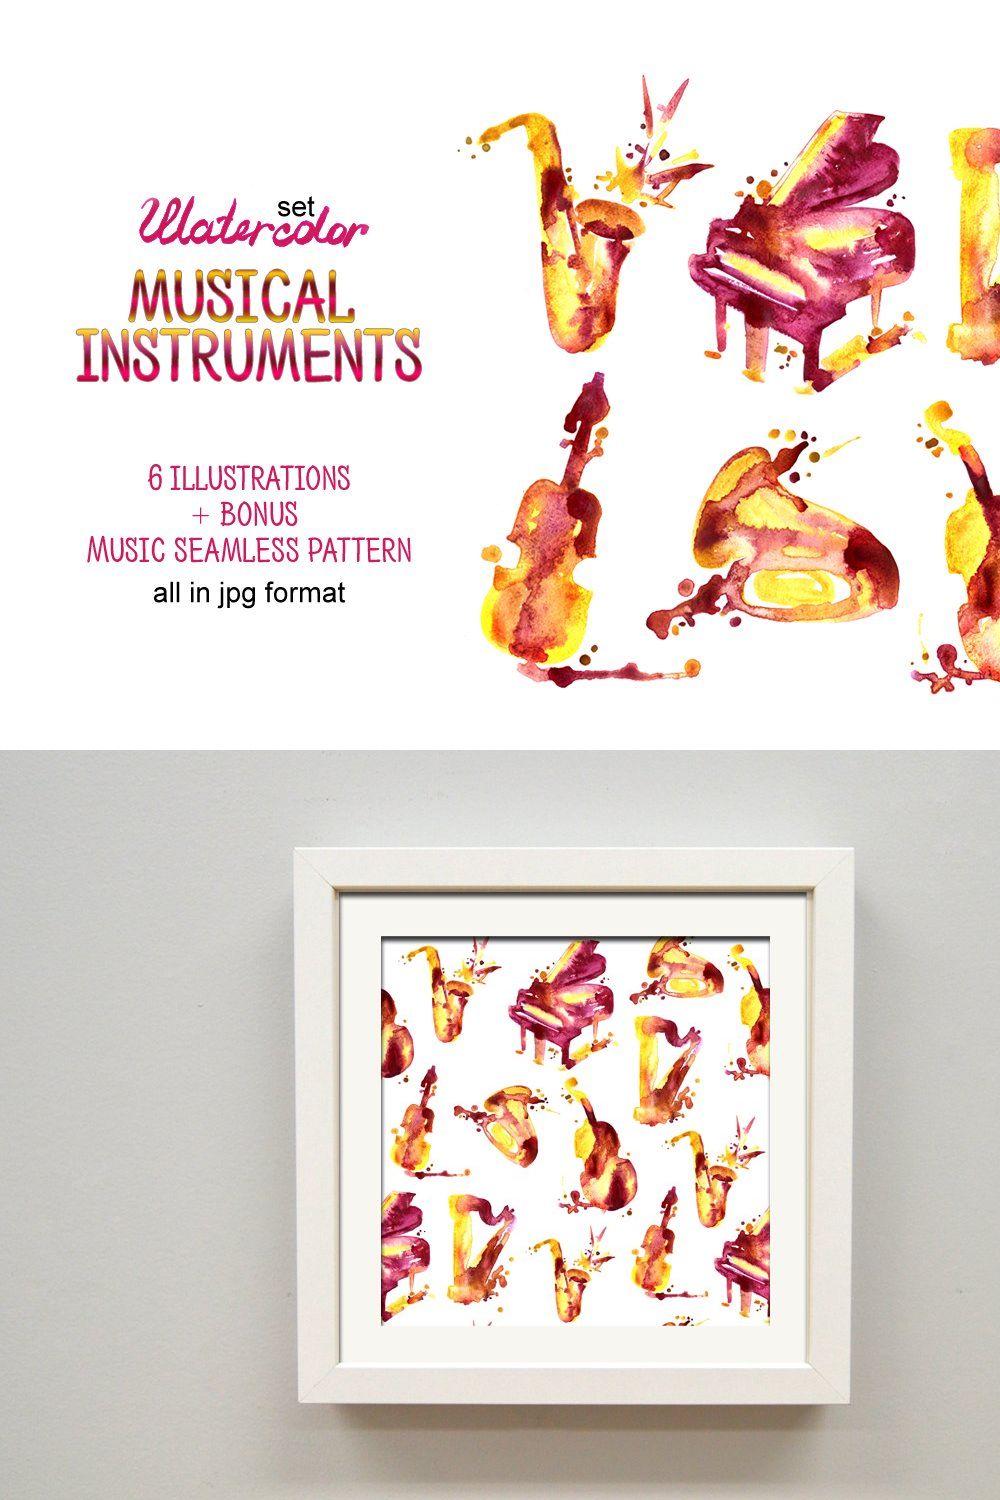 Watercolor musical instruments pinterest preview image.